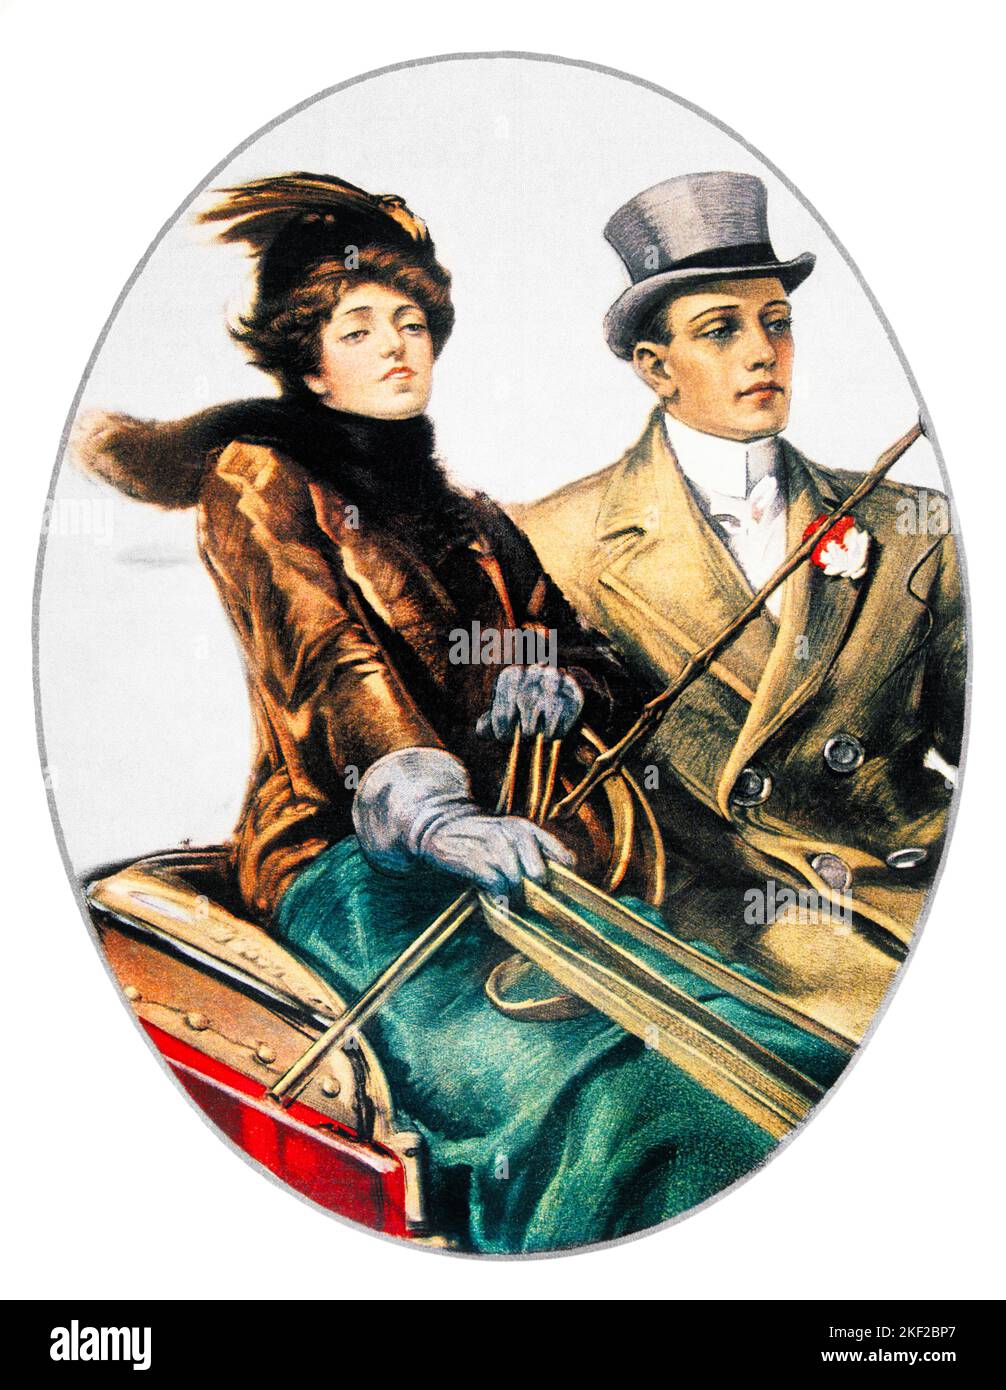 1900s FASHIONABLY DRESSED WOMAN HOLDING HORSE’S REINS IN GLOVED HANDS DRIVING A CARRIAGE ACCOMPANIED BY MAN WEARING TOP HAT - kh13574 NAW001 HARS YOUNG ADULT TEAMWORK WEALTHY RICH LIFESTYLE SPEED SATISFACTION FEMALES MARRIED SPOUSE HUSBANDS HOME LIFE LUXURY COPY SPACE FRIENDSHIP HALF-LENGTH LADIES PERSONS MALES CONFIDENCE TRANSPORTATION PARTNER CARRIAGE REINS ADVENTURE STYLES EXCITEMENT LOW ANGLE PRIDE SUPERIOR GLOVED UPSCALE CONNECTION CONCEPTUAL FASHIONABLY AFFLUENT STYLISH COOPERATION FASHIONS HORSE'S TOGETHERNESS WELL-TO-DO WIVES YOUNG ADULT MAN YOUNG ADULT WOMAN ATTITUDE Stock Photo